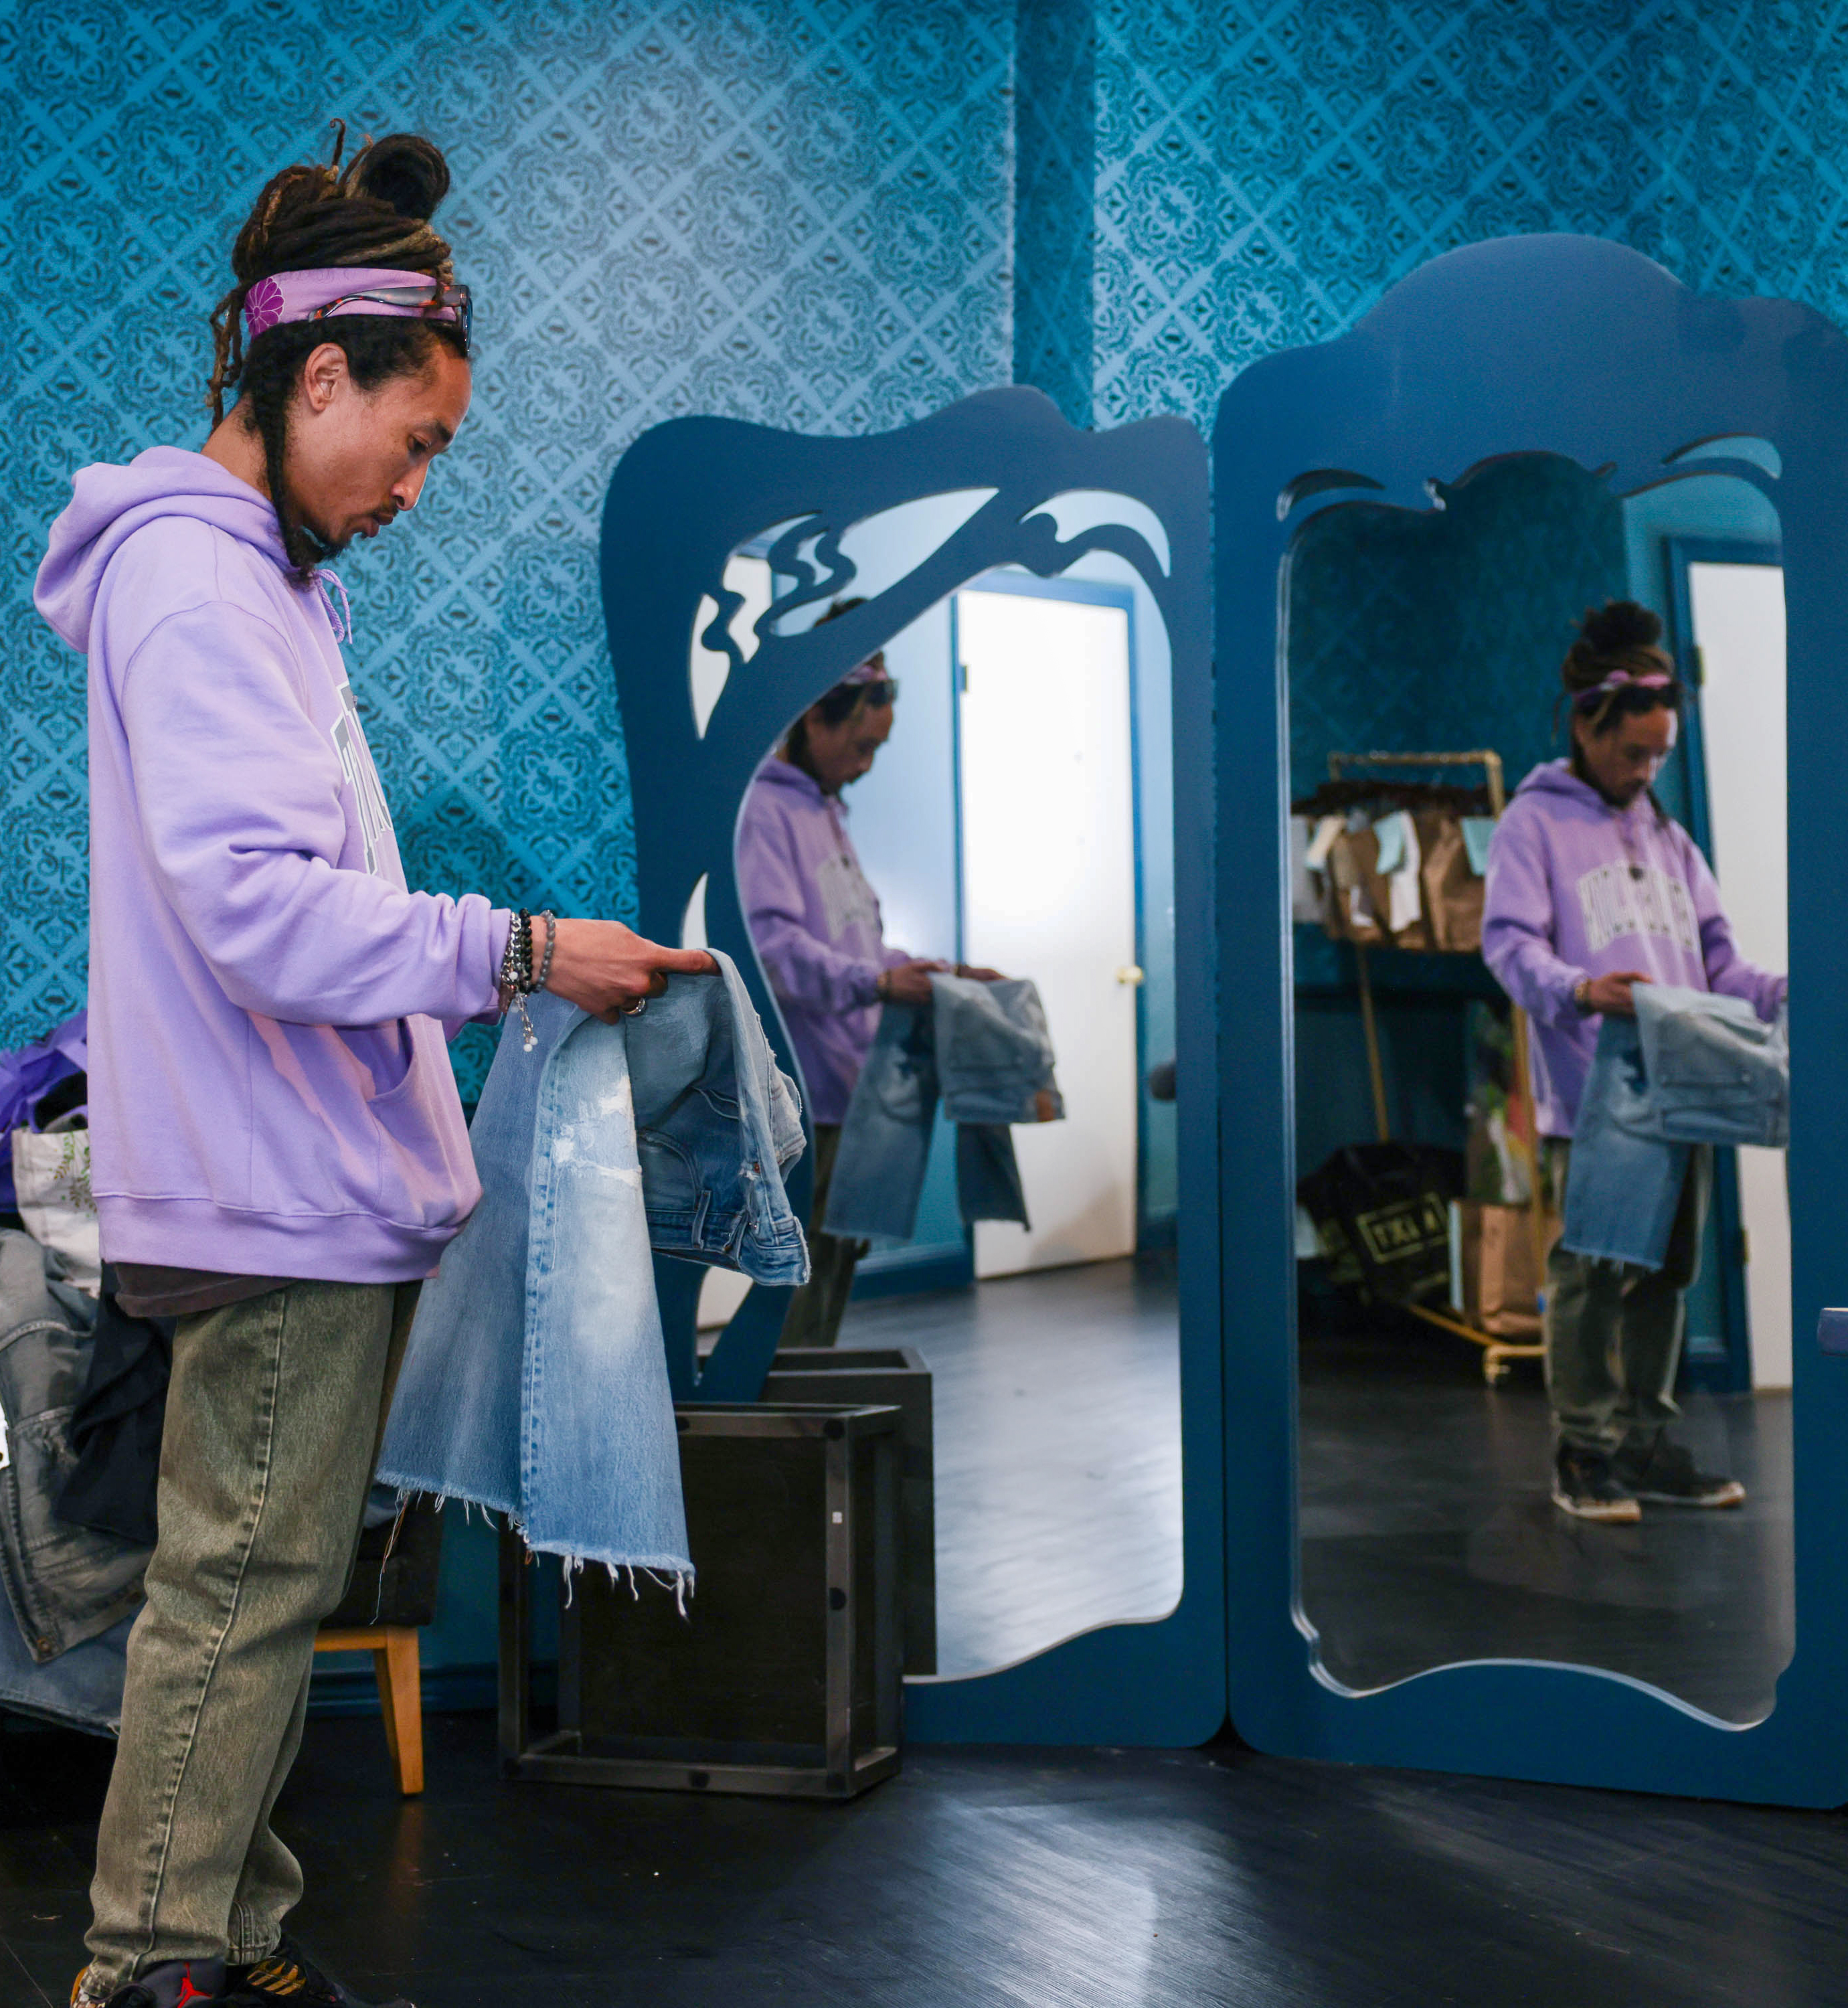 A person in a purple hoodie examines a denim jacket in a dressing room with ornate blue mirrors.